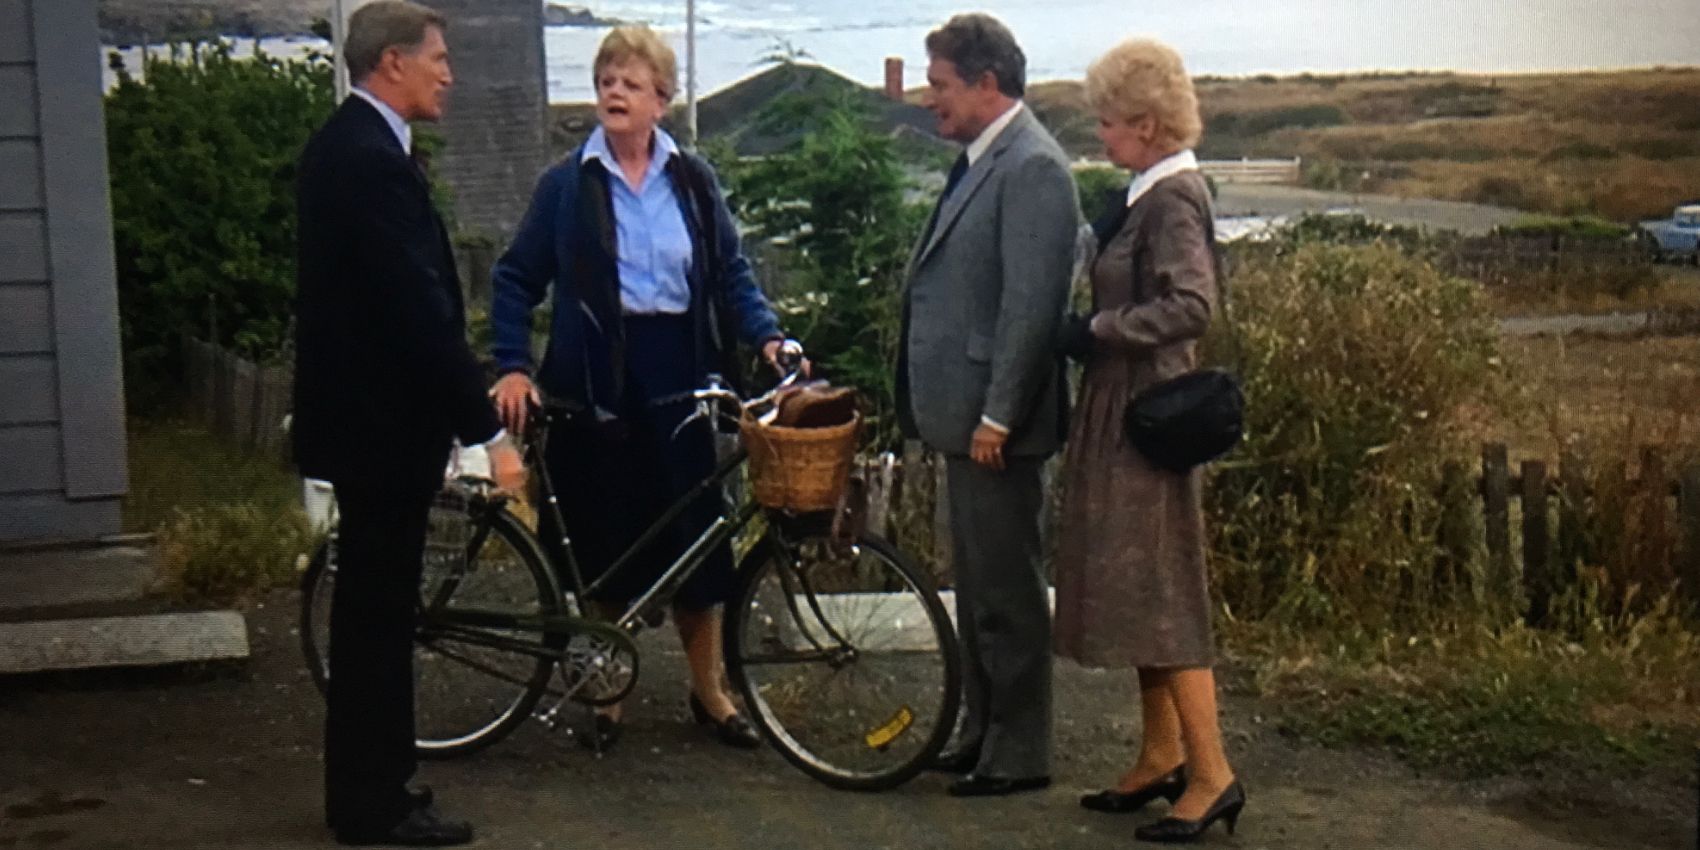 Jessica meets friends while out on her bike in Murder She Wrote